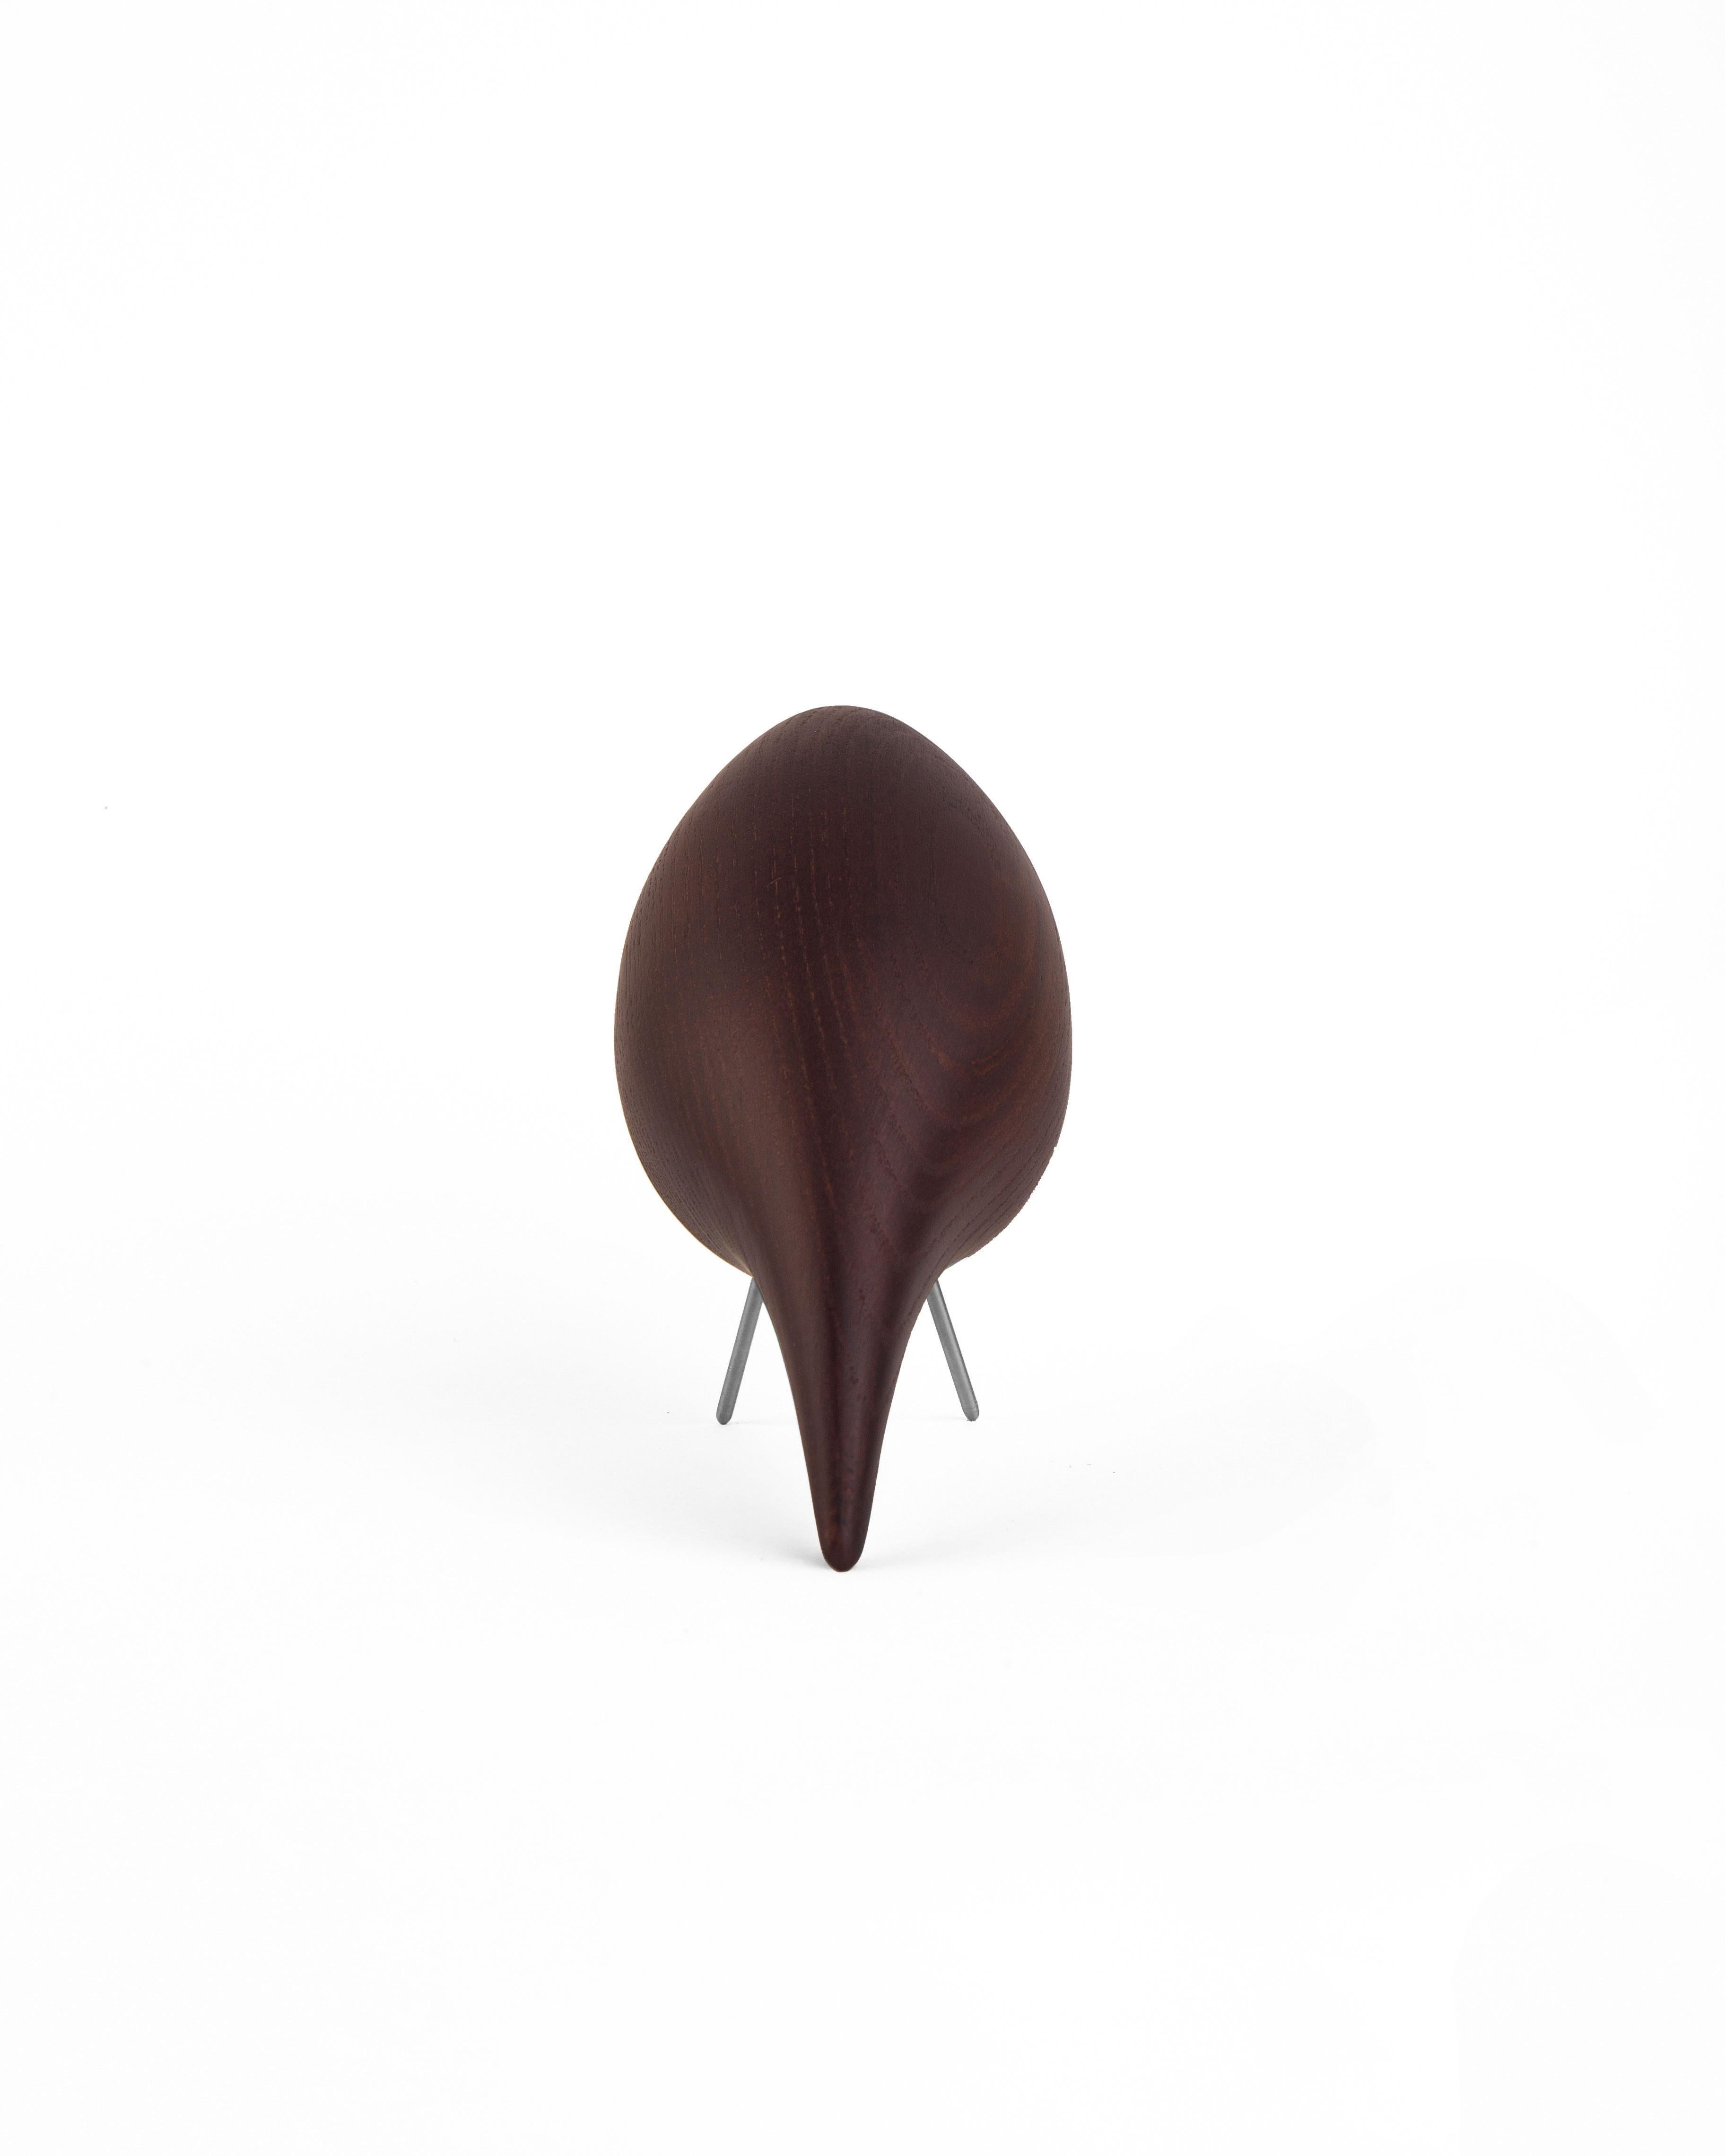 Contemporay Tweety Decorative Bird CS2 by Noom, Brown Ashwood, In stock For Sale 6